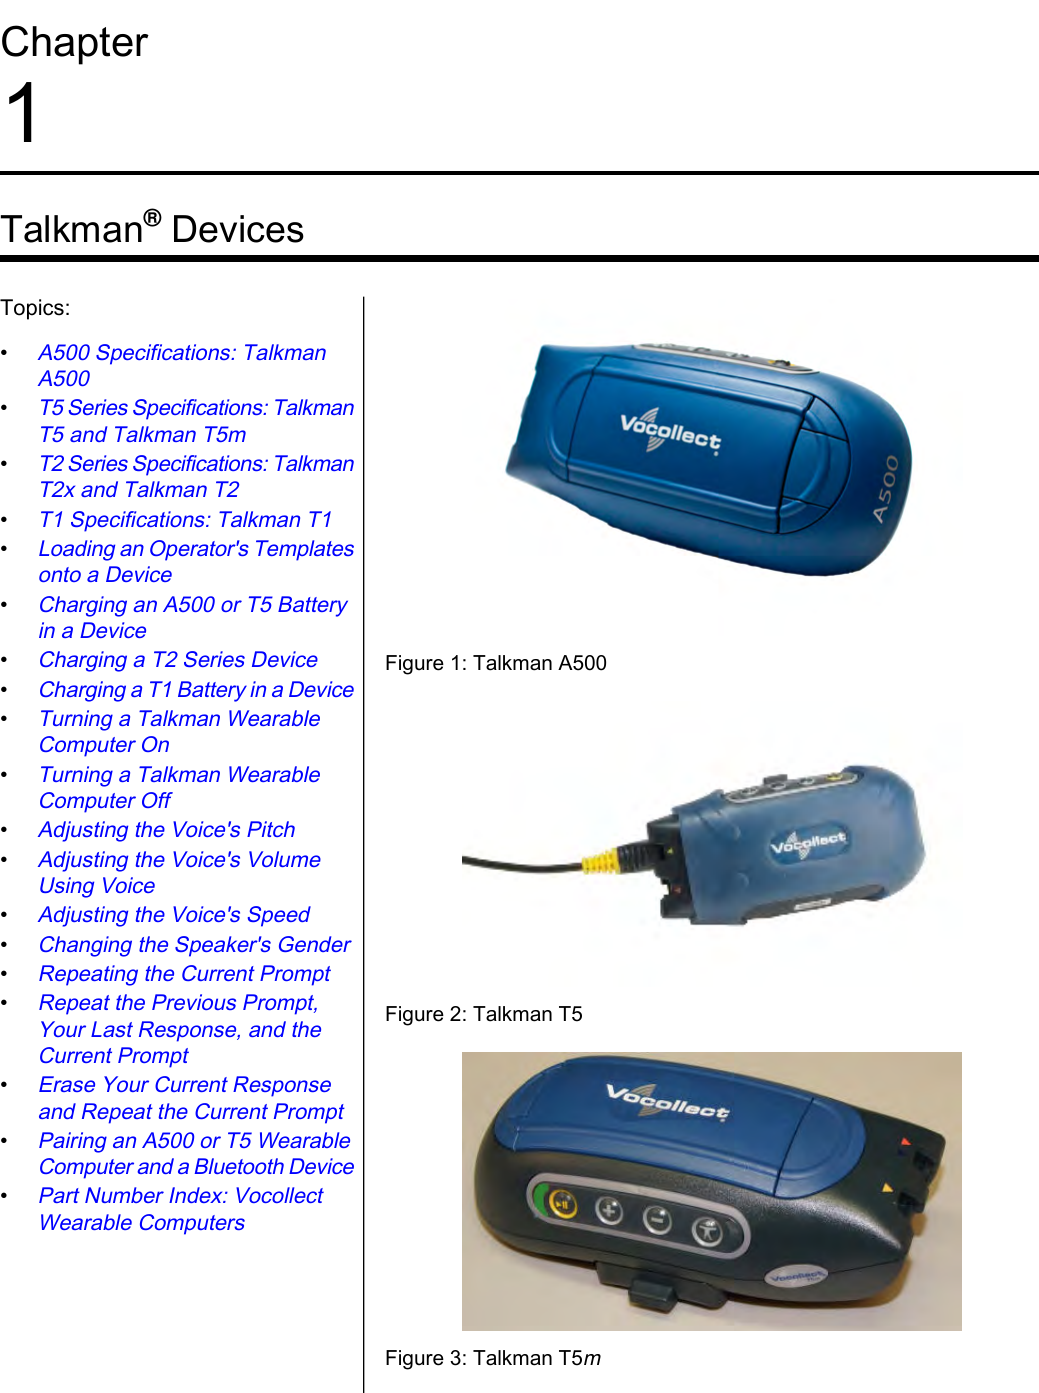 Chapter1Talkman®DevicesFigure 1: Talkman A500Topics:•A500 Specifications: TalkmanA500•T5 Series Specifications: TalkmanT5 and Talkman T5m•T2 Series Specifications: TalkmanT2x and Talkman T2•T1 Specifications: Talkman T1•Loading an Operator&apos;s Templatesonto a Device•Charging an A500 or T5 Batteryin a Device•Charging a T2 Series Device•Charging a T1 Battery in a DeviceFigure 2: Talkman T5•Turning a Talkman WearableComputer On•Turning a Talkman WearableComputer Off•Adjusting the Voice&apos;s Pitch•Adjusting the Voice&apos;s VolumeUsing Voice•Adjusting the Voice&apos;s Speed•Changing the Speaker&apos;s Gender•Repeating the Current Prompt•Repeat the Previous Prompt,Your Last Response, and theCurrent PromptFigure 3: Talkman T5m•Erase Your Current Responseand Repeat the Current Prompt•Pairing an A500 or T5 WearableComputer and a Bluetooth Device•Part Number Index: VocollectWearable Computers